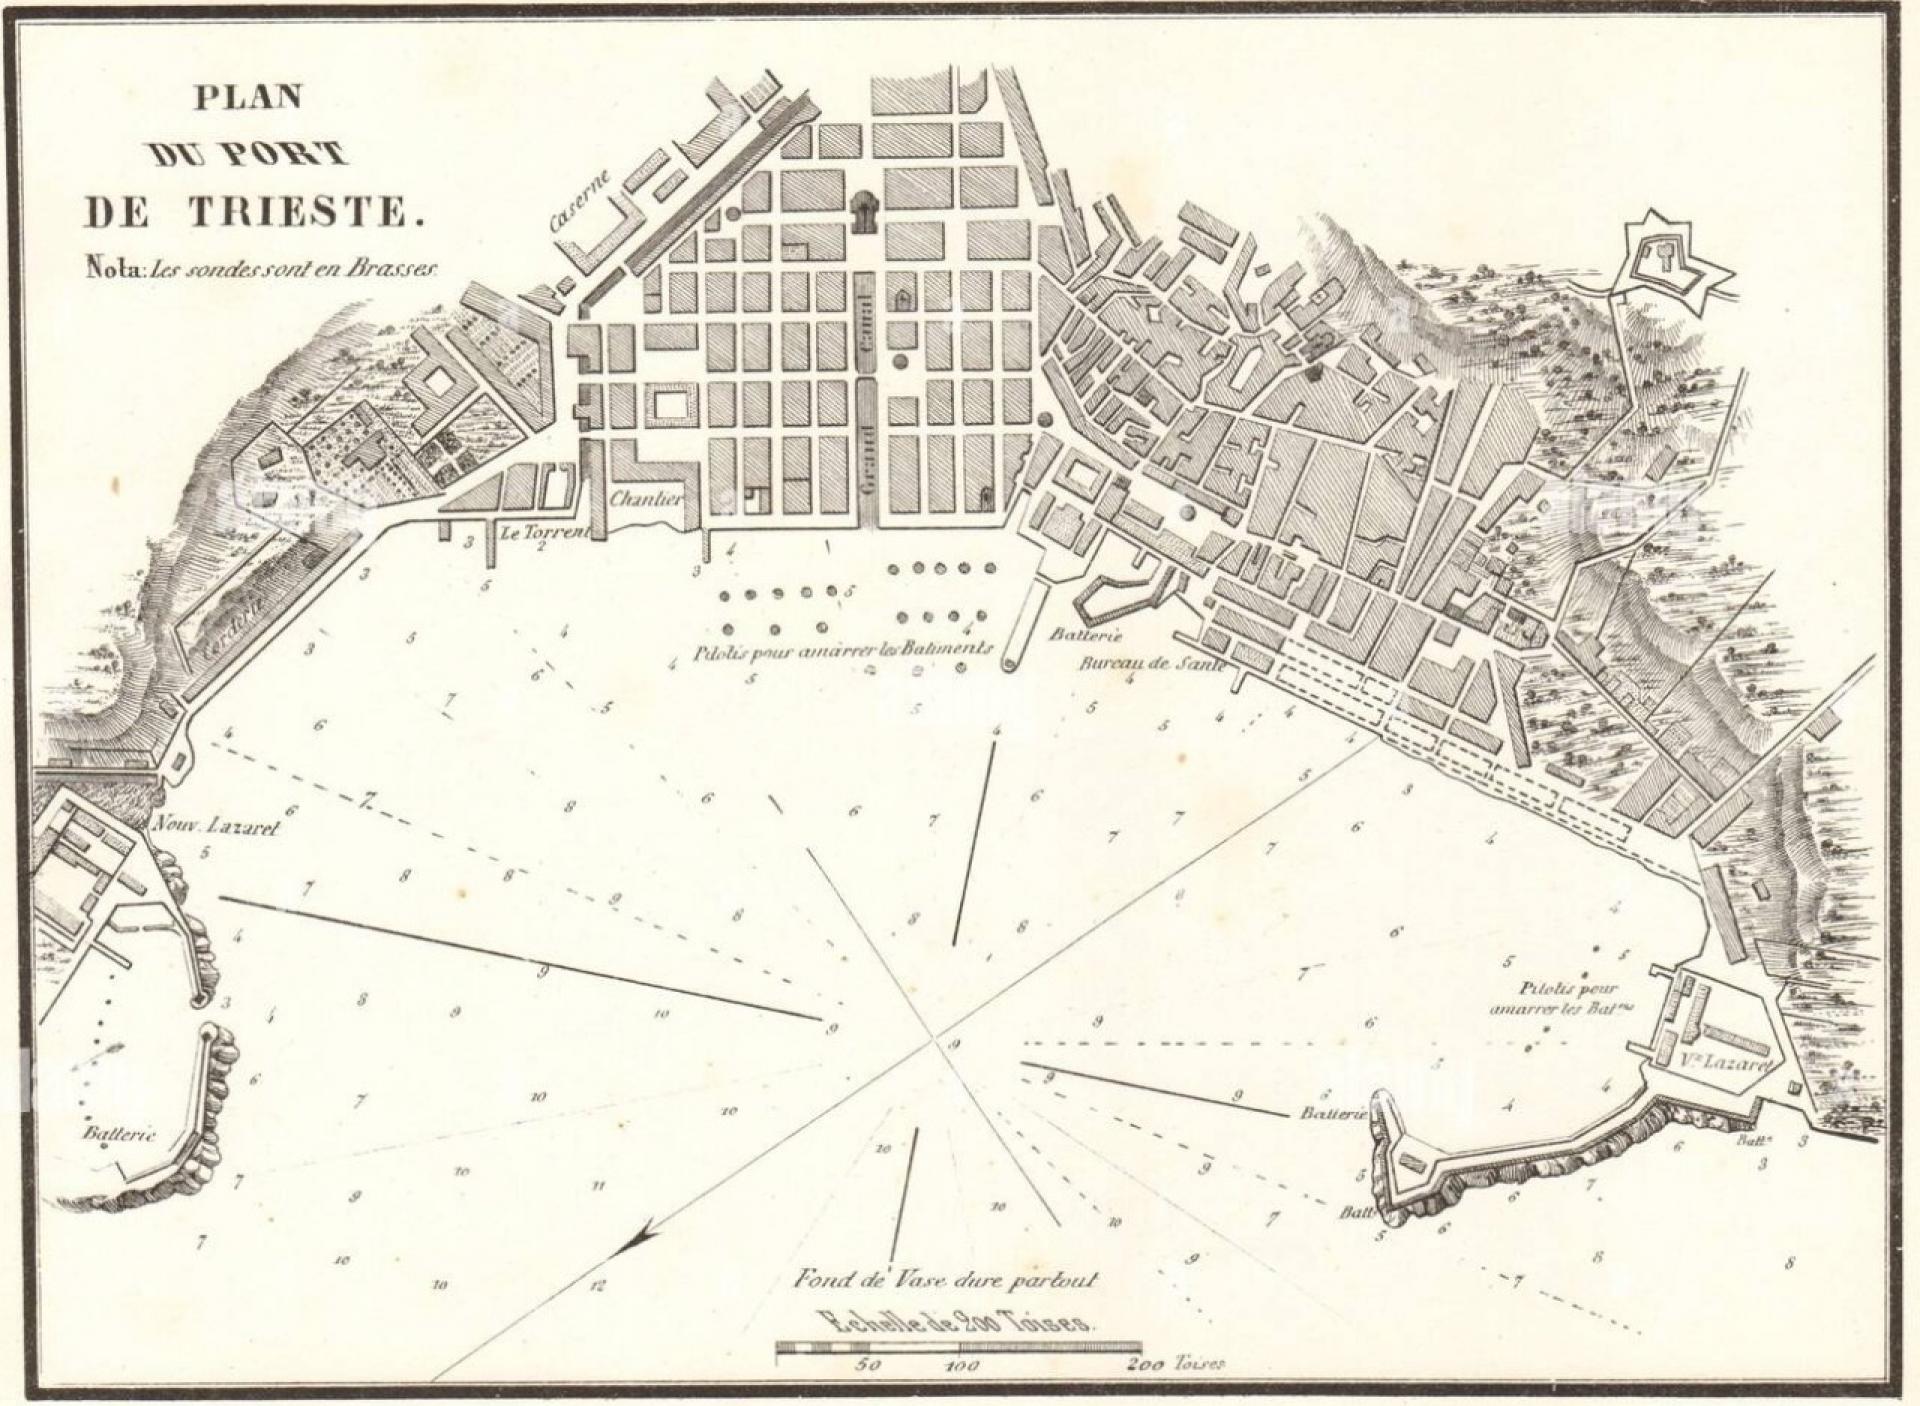 Plan of the port of Trieste, Italy by Gauthier, 1854